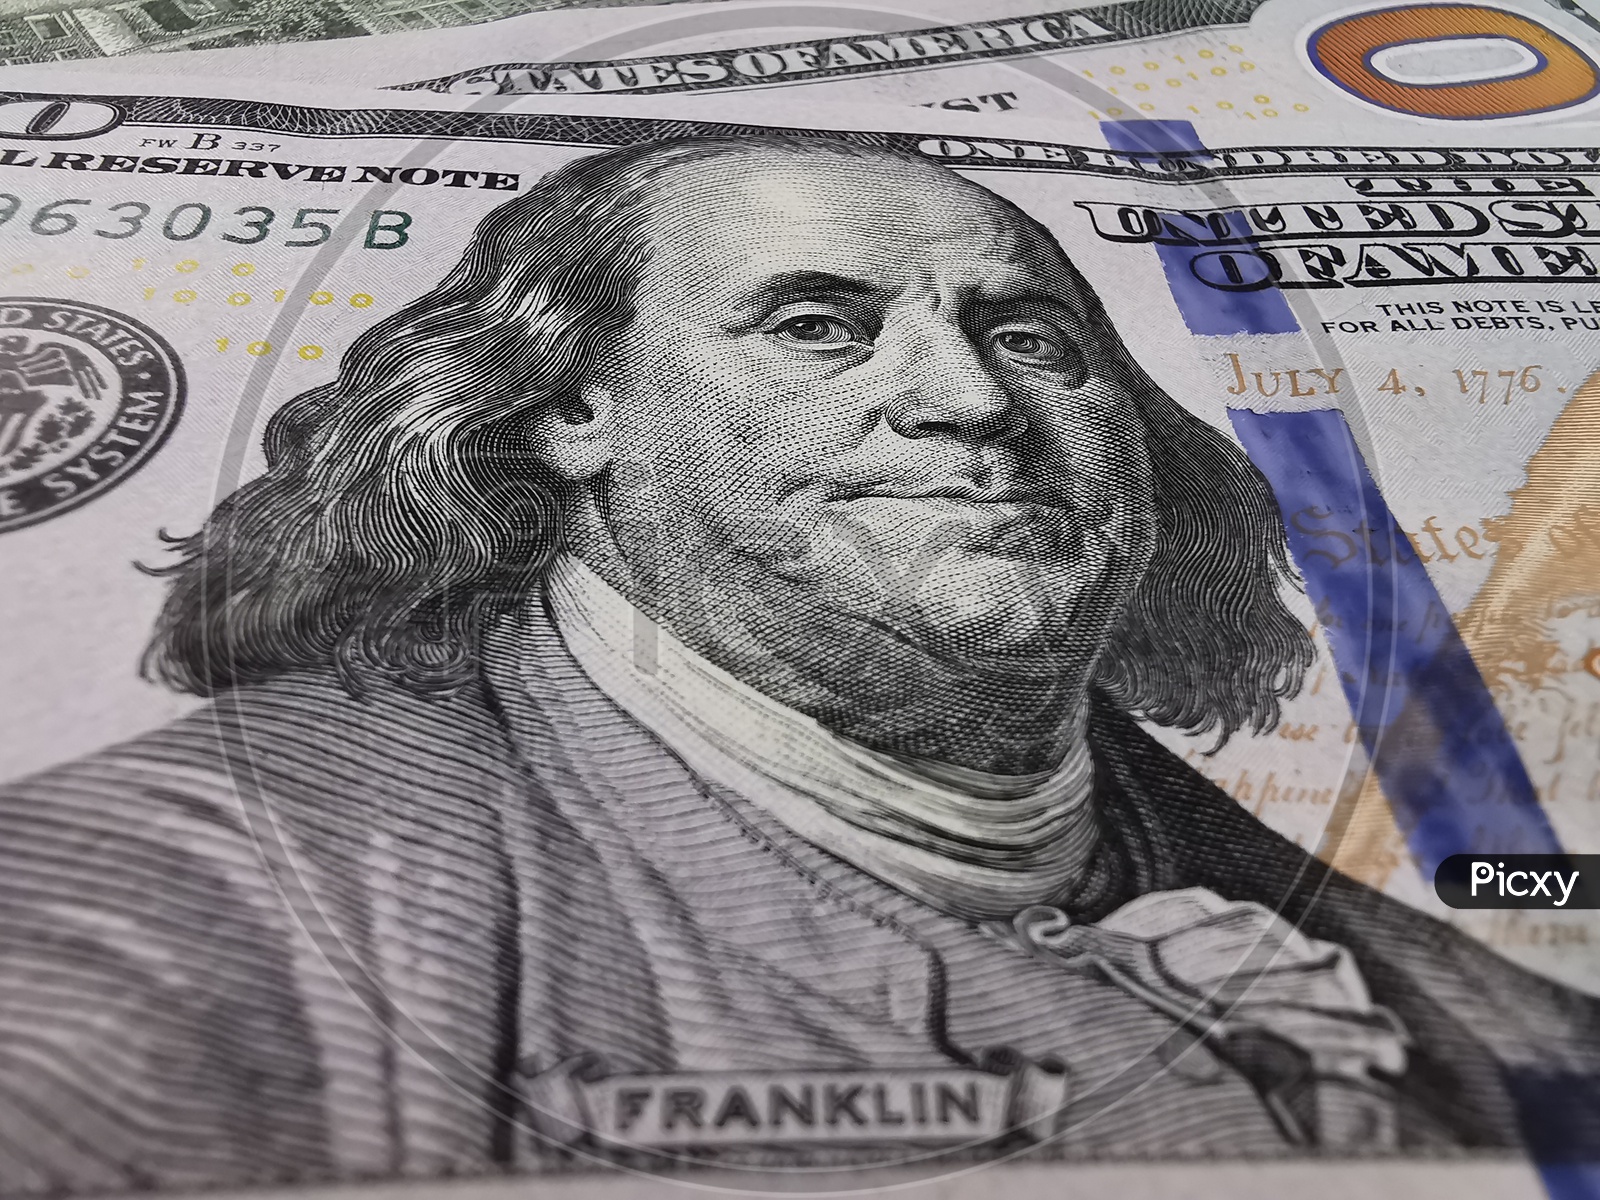 Benjamin Franklin Picture on US 100 Dollar Currency Notes Or Dollar Bills Closeup Shot